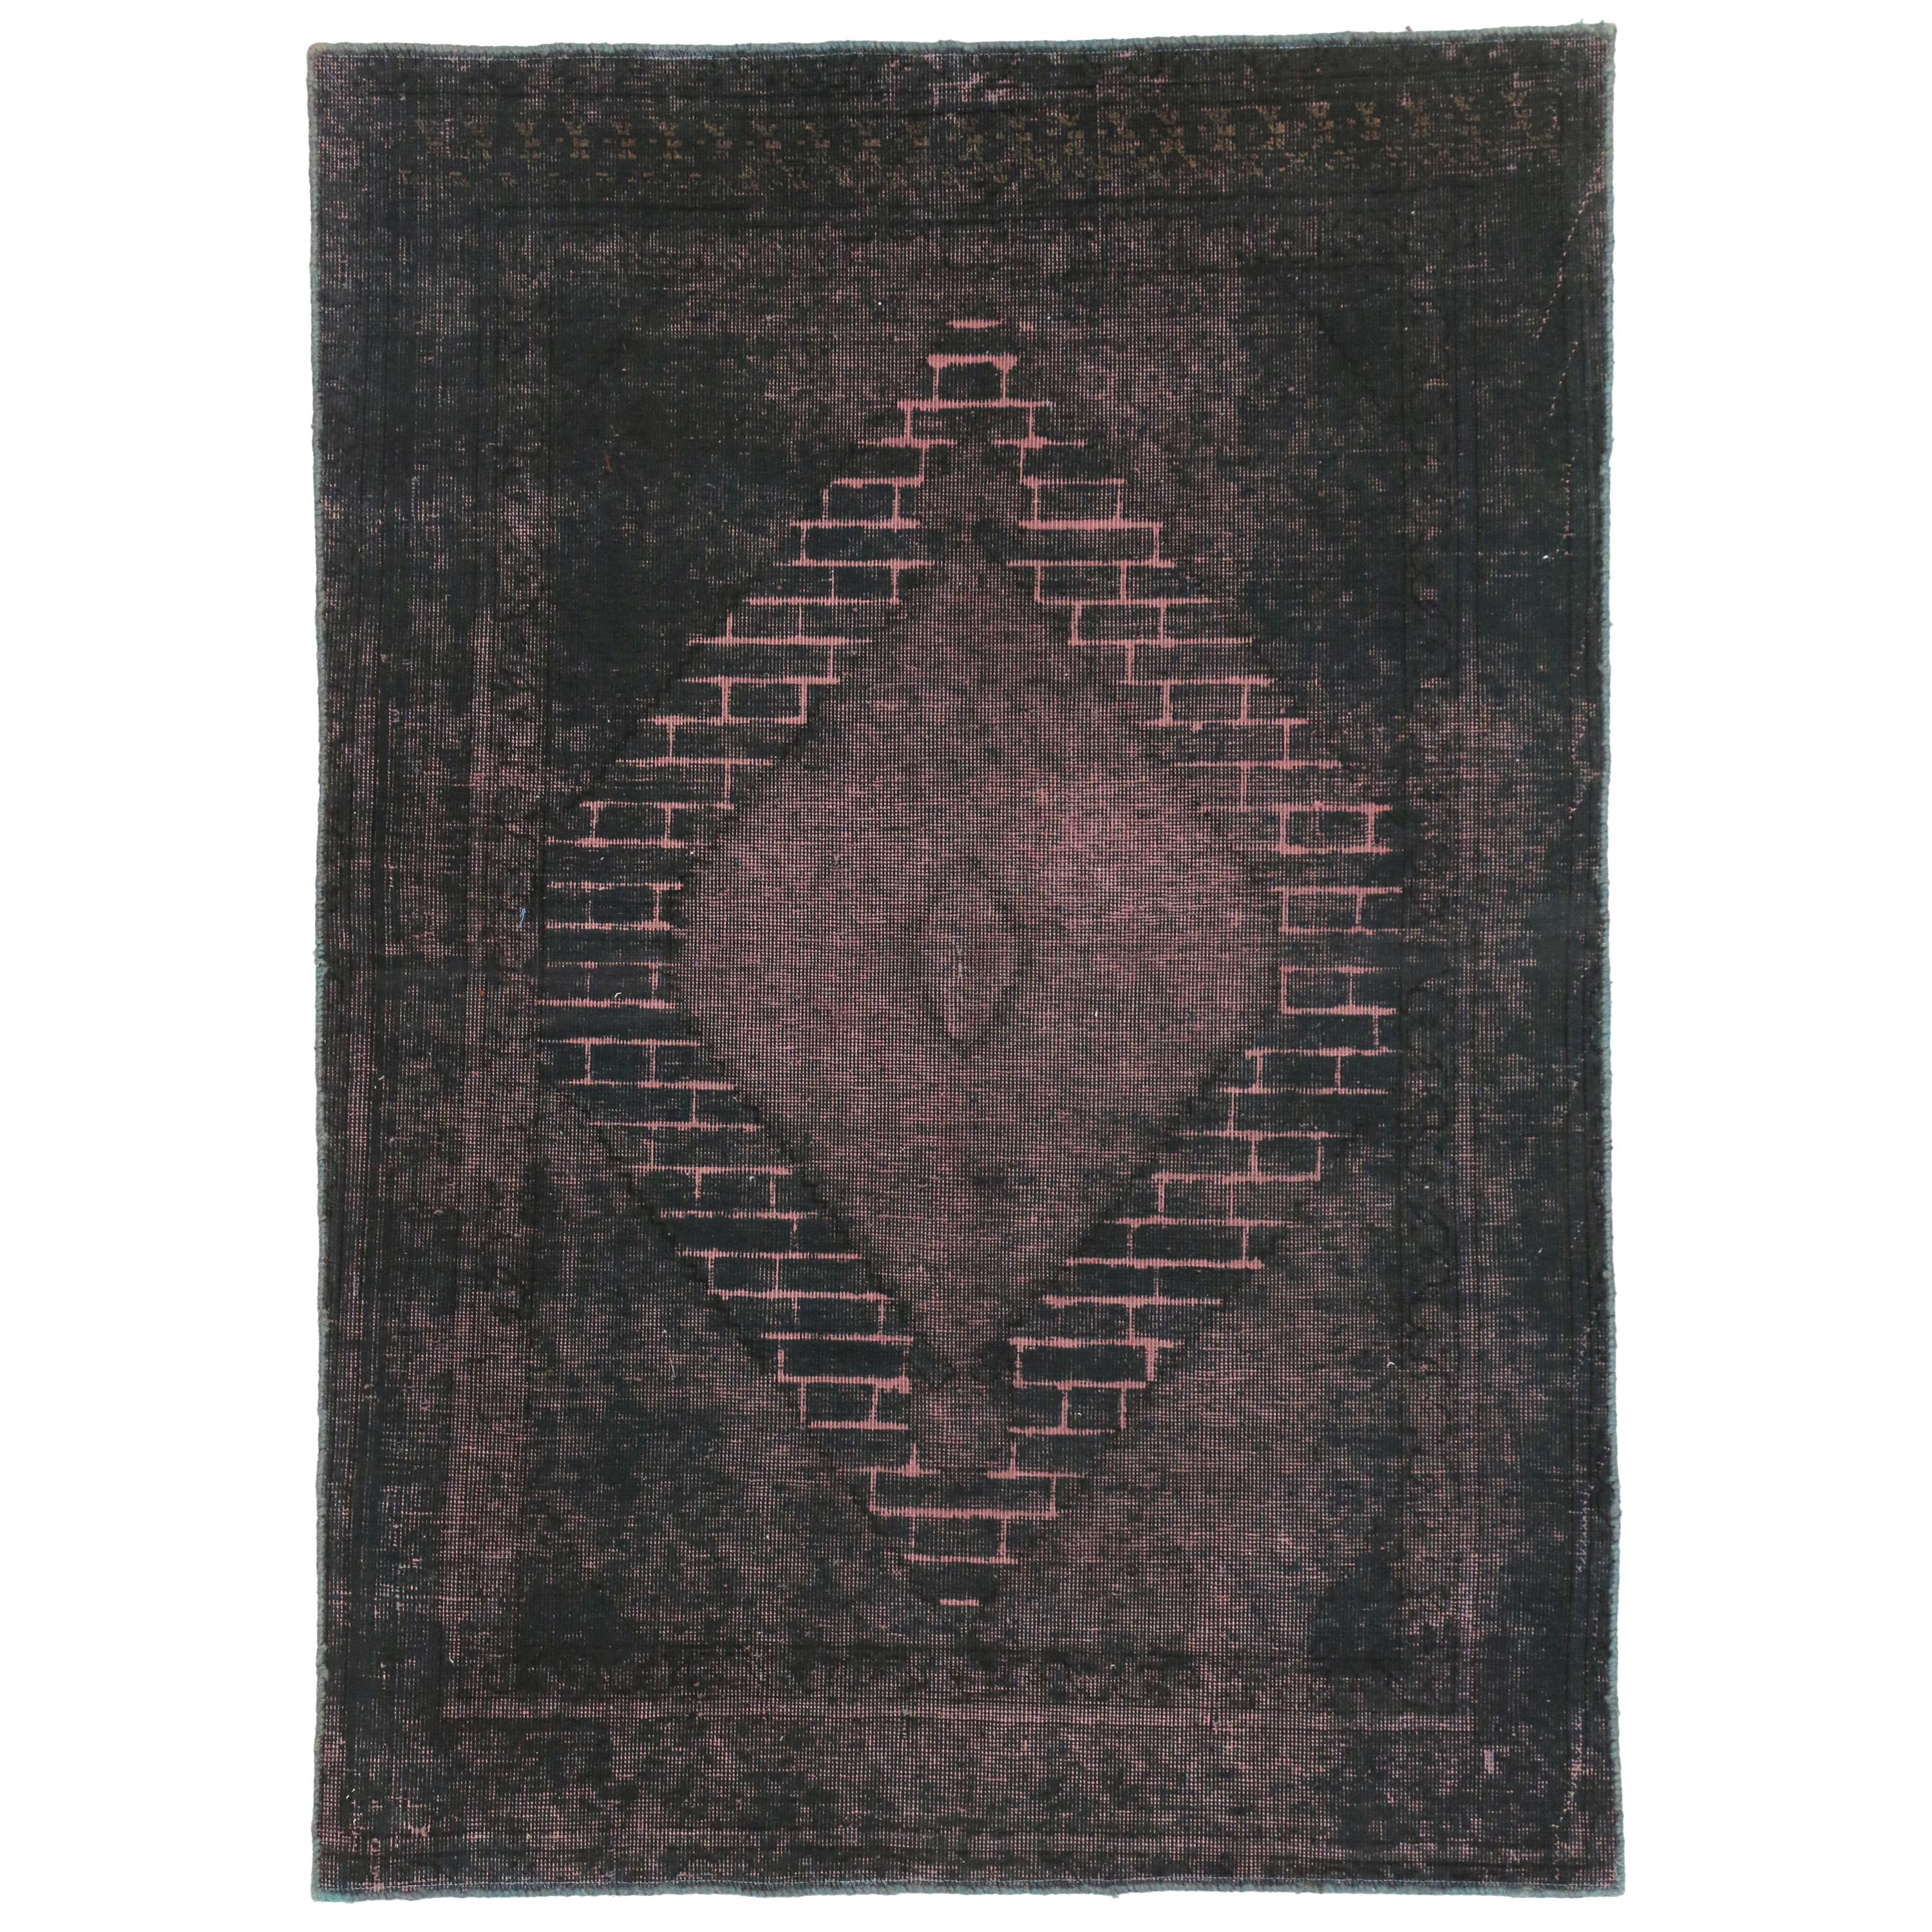 Vintage Turkish Overdyed Rug, Modern Industrial Luxe Meets Dark & Moody For Sale